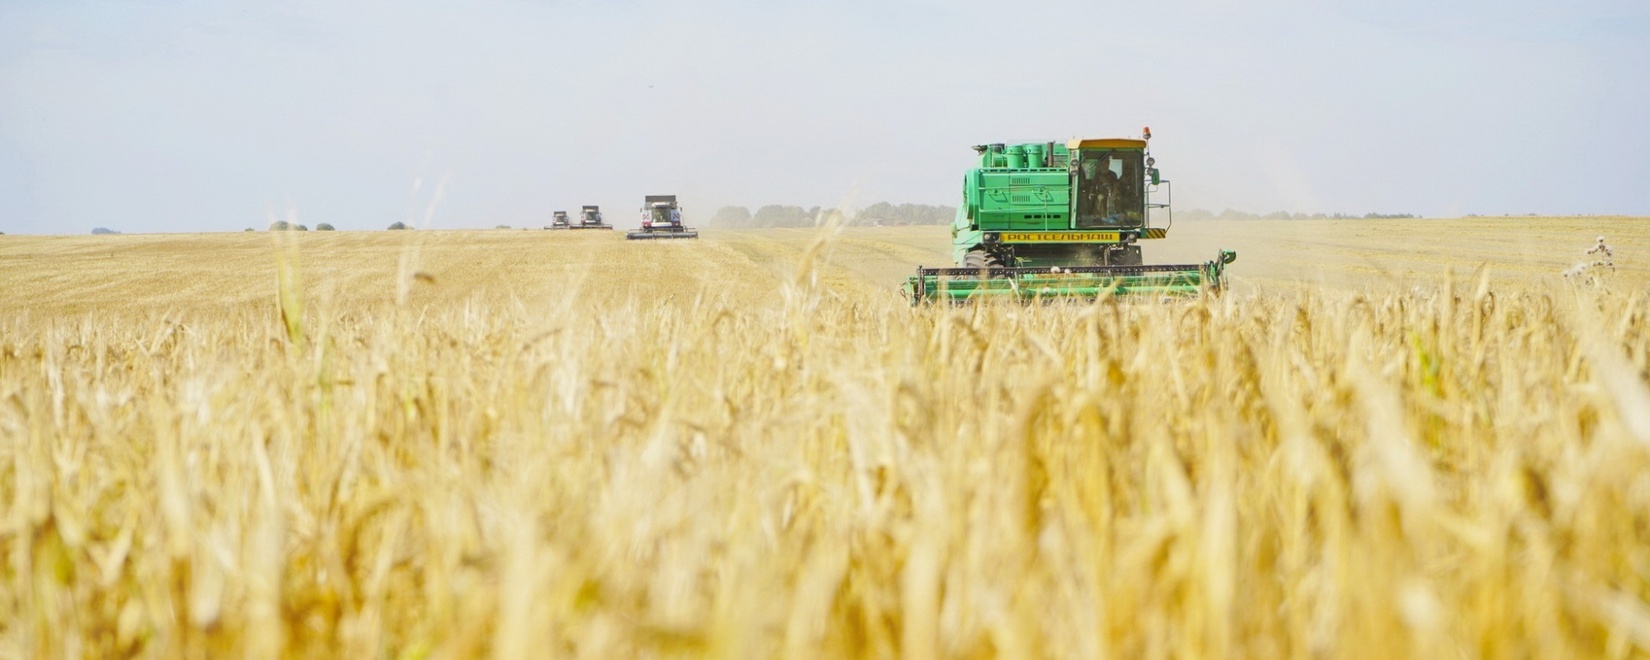 World grain market: prices for wheat, soybeans and corn fell on Friday